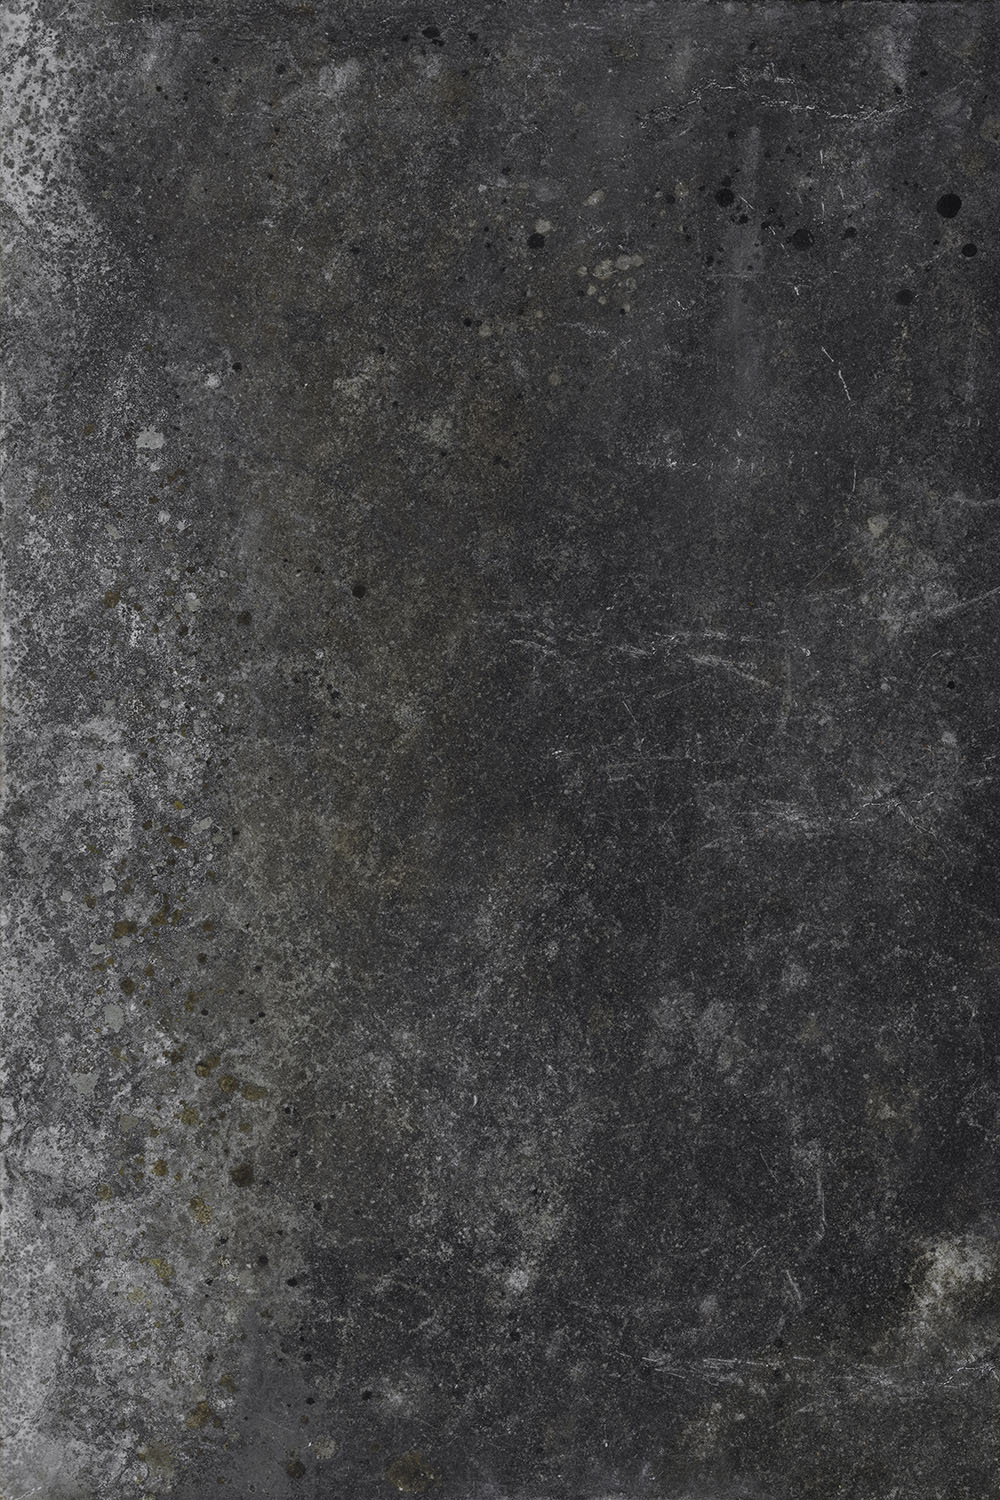 Weathered stone photo backdrop printed on high quality vinyl